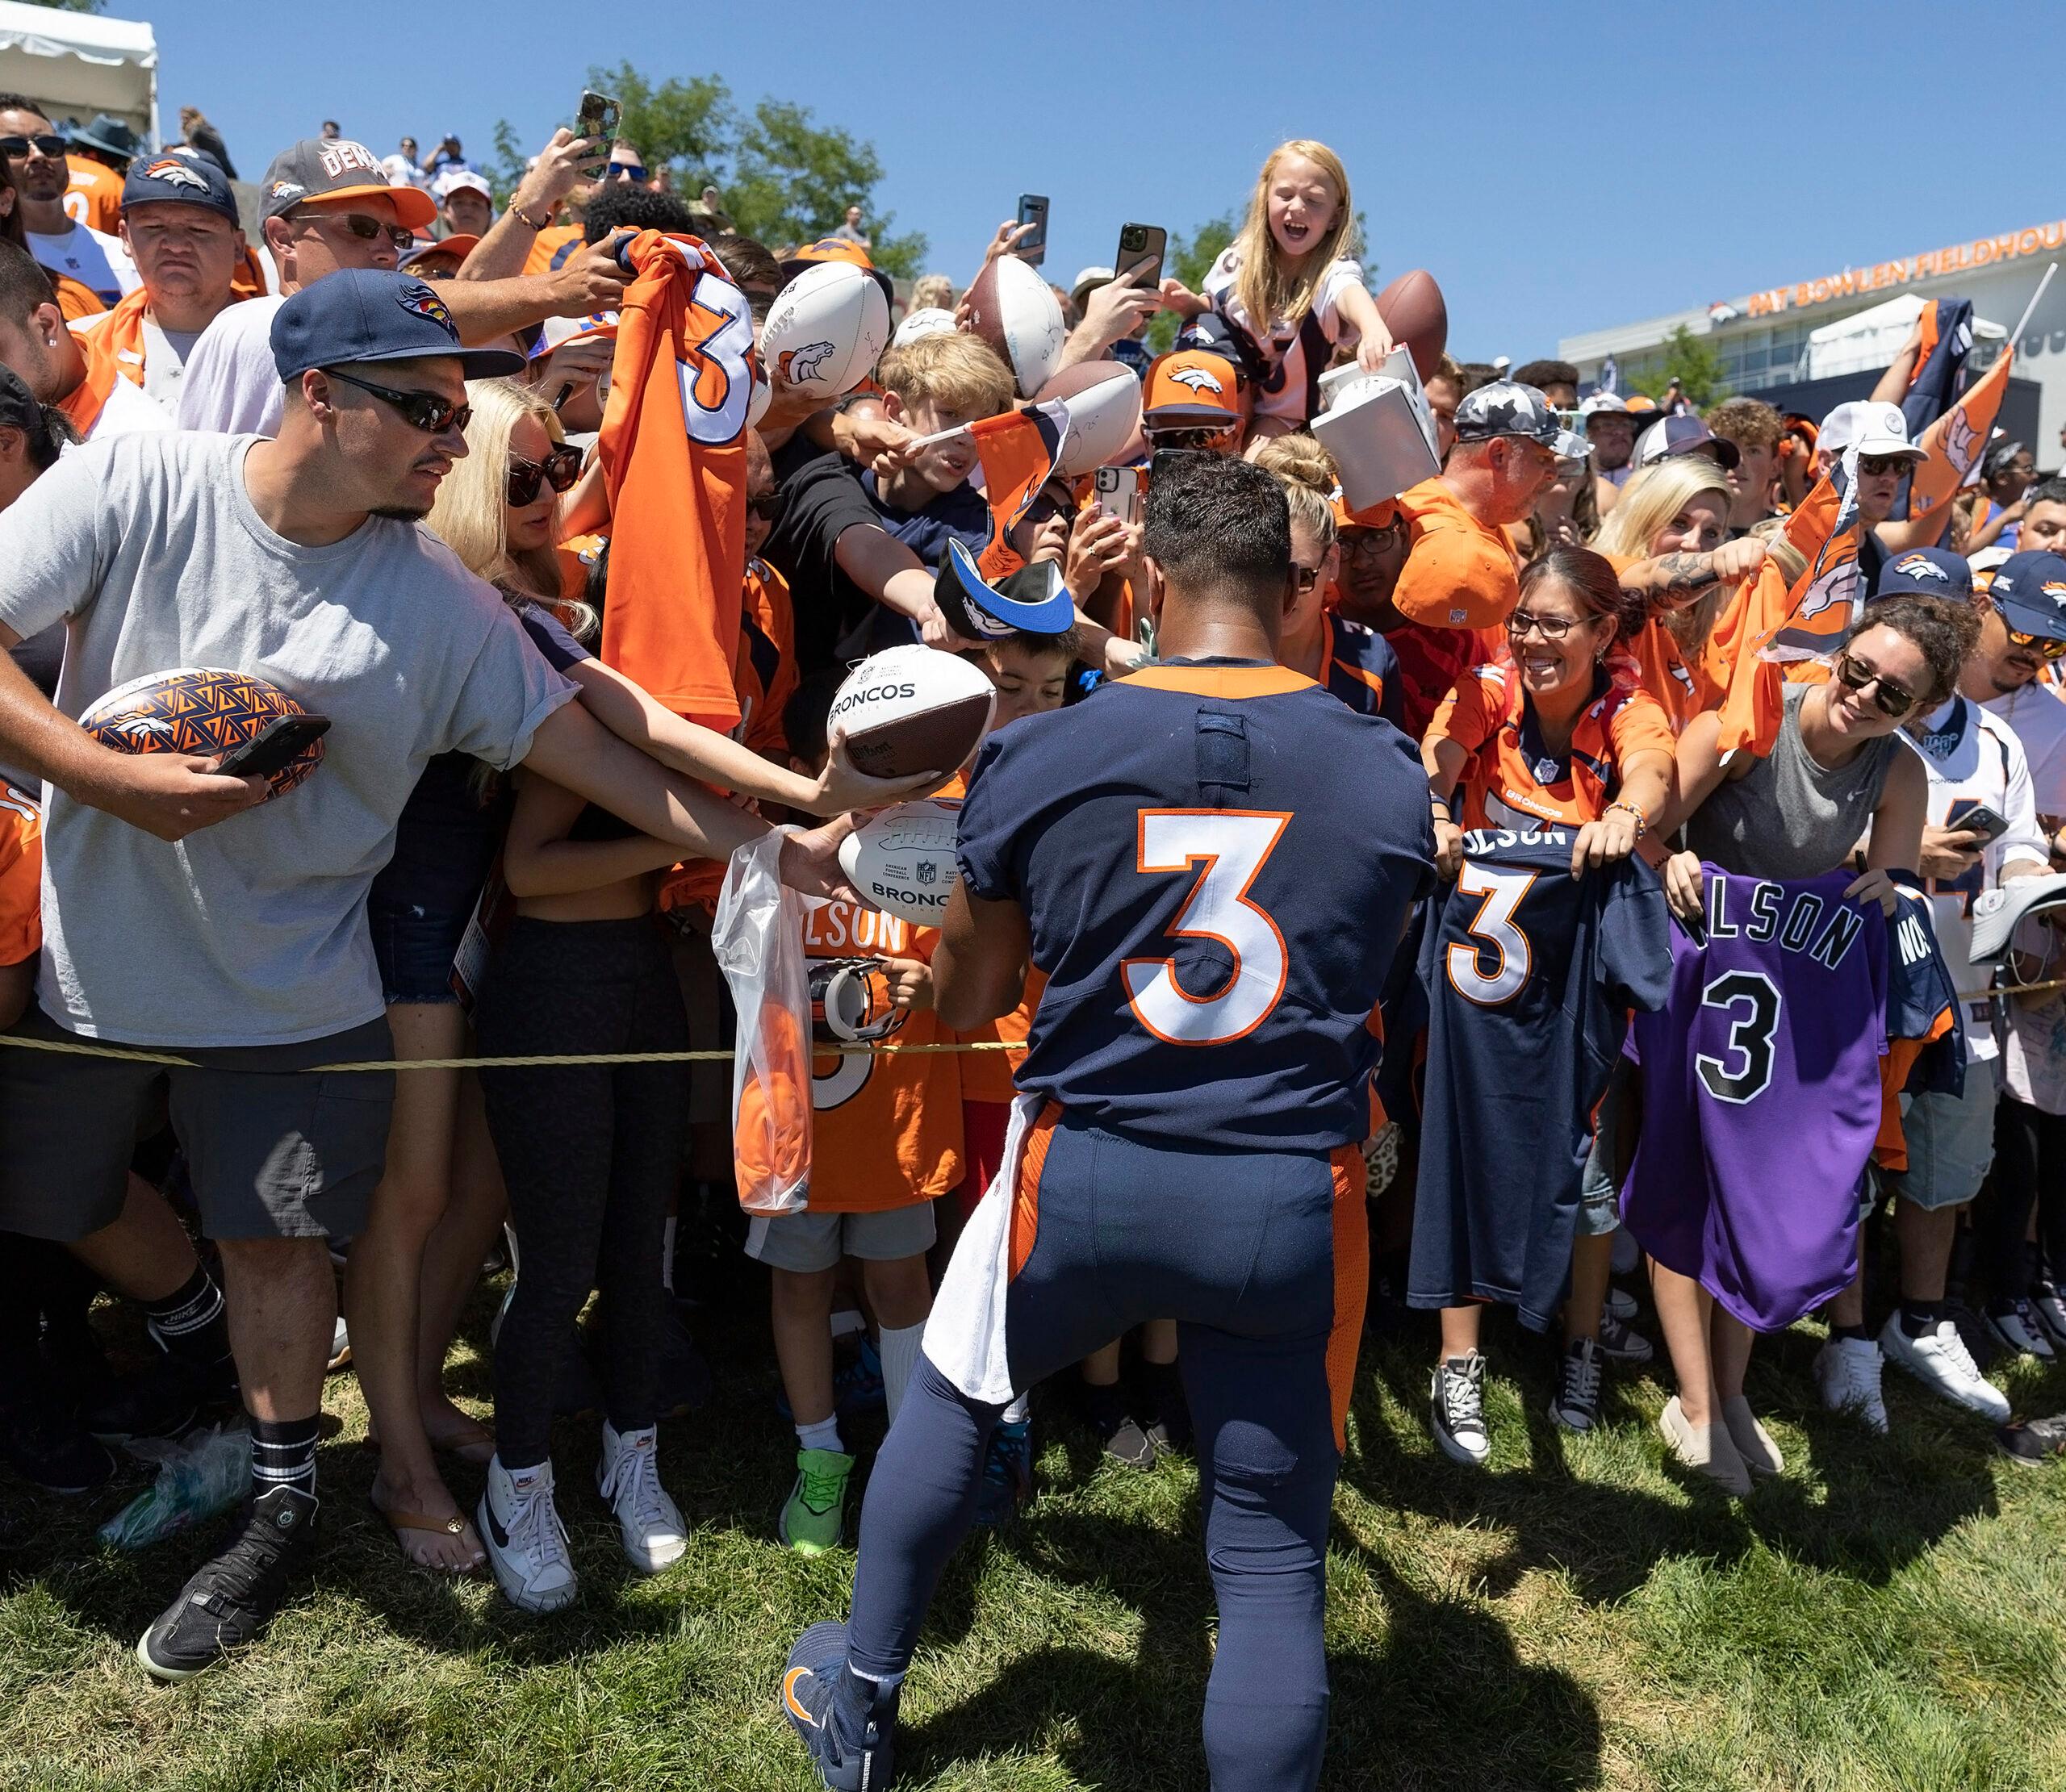 Russell Wilson signing autographs at NFL Training Camp - Denver Broncos Training Camp on Saturday morning.